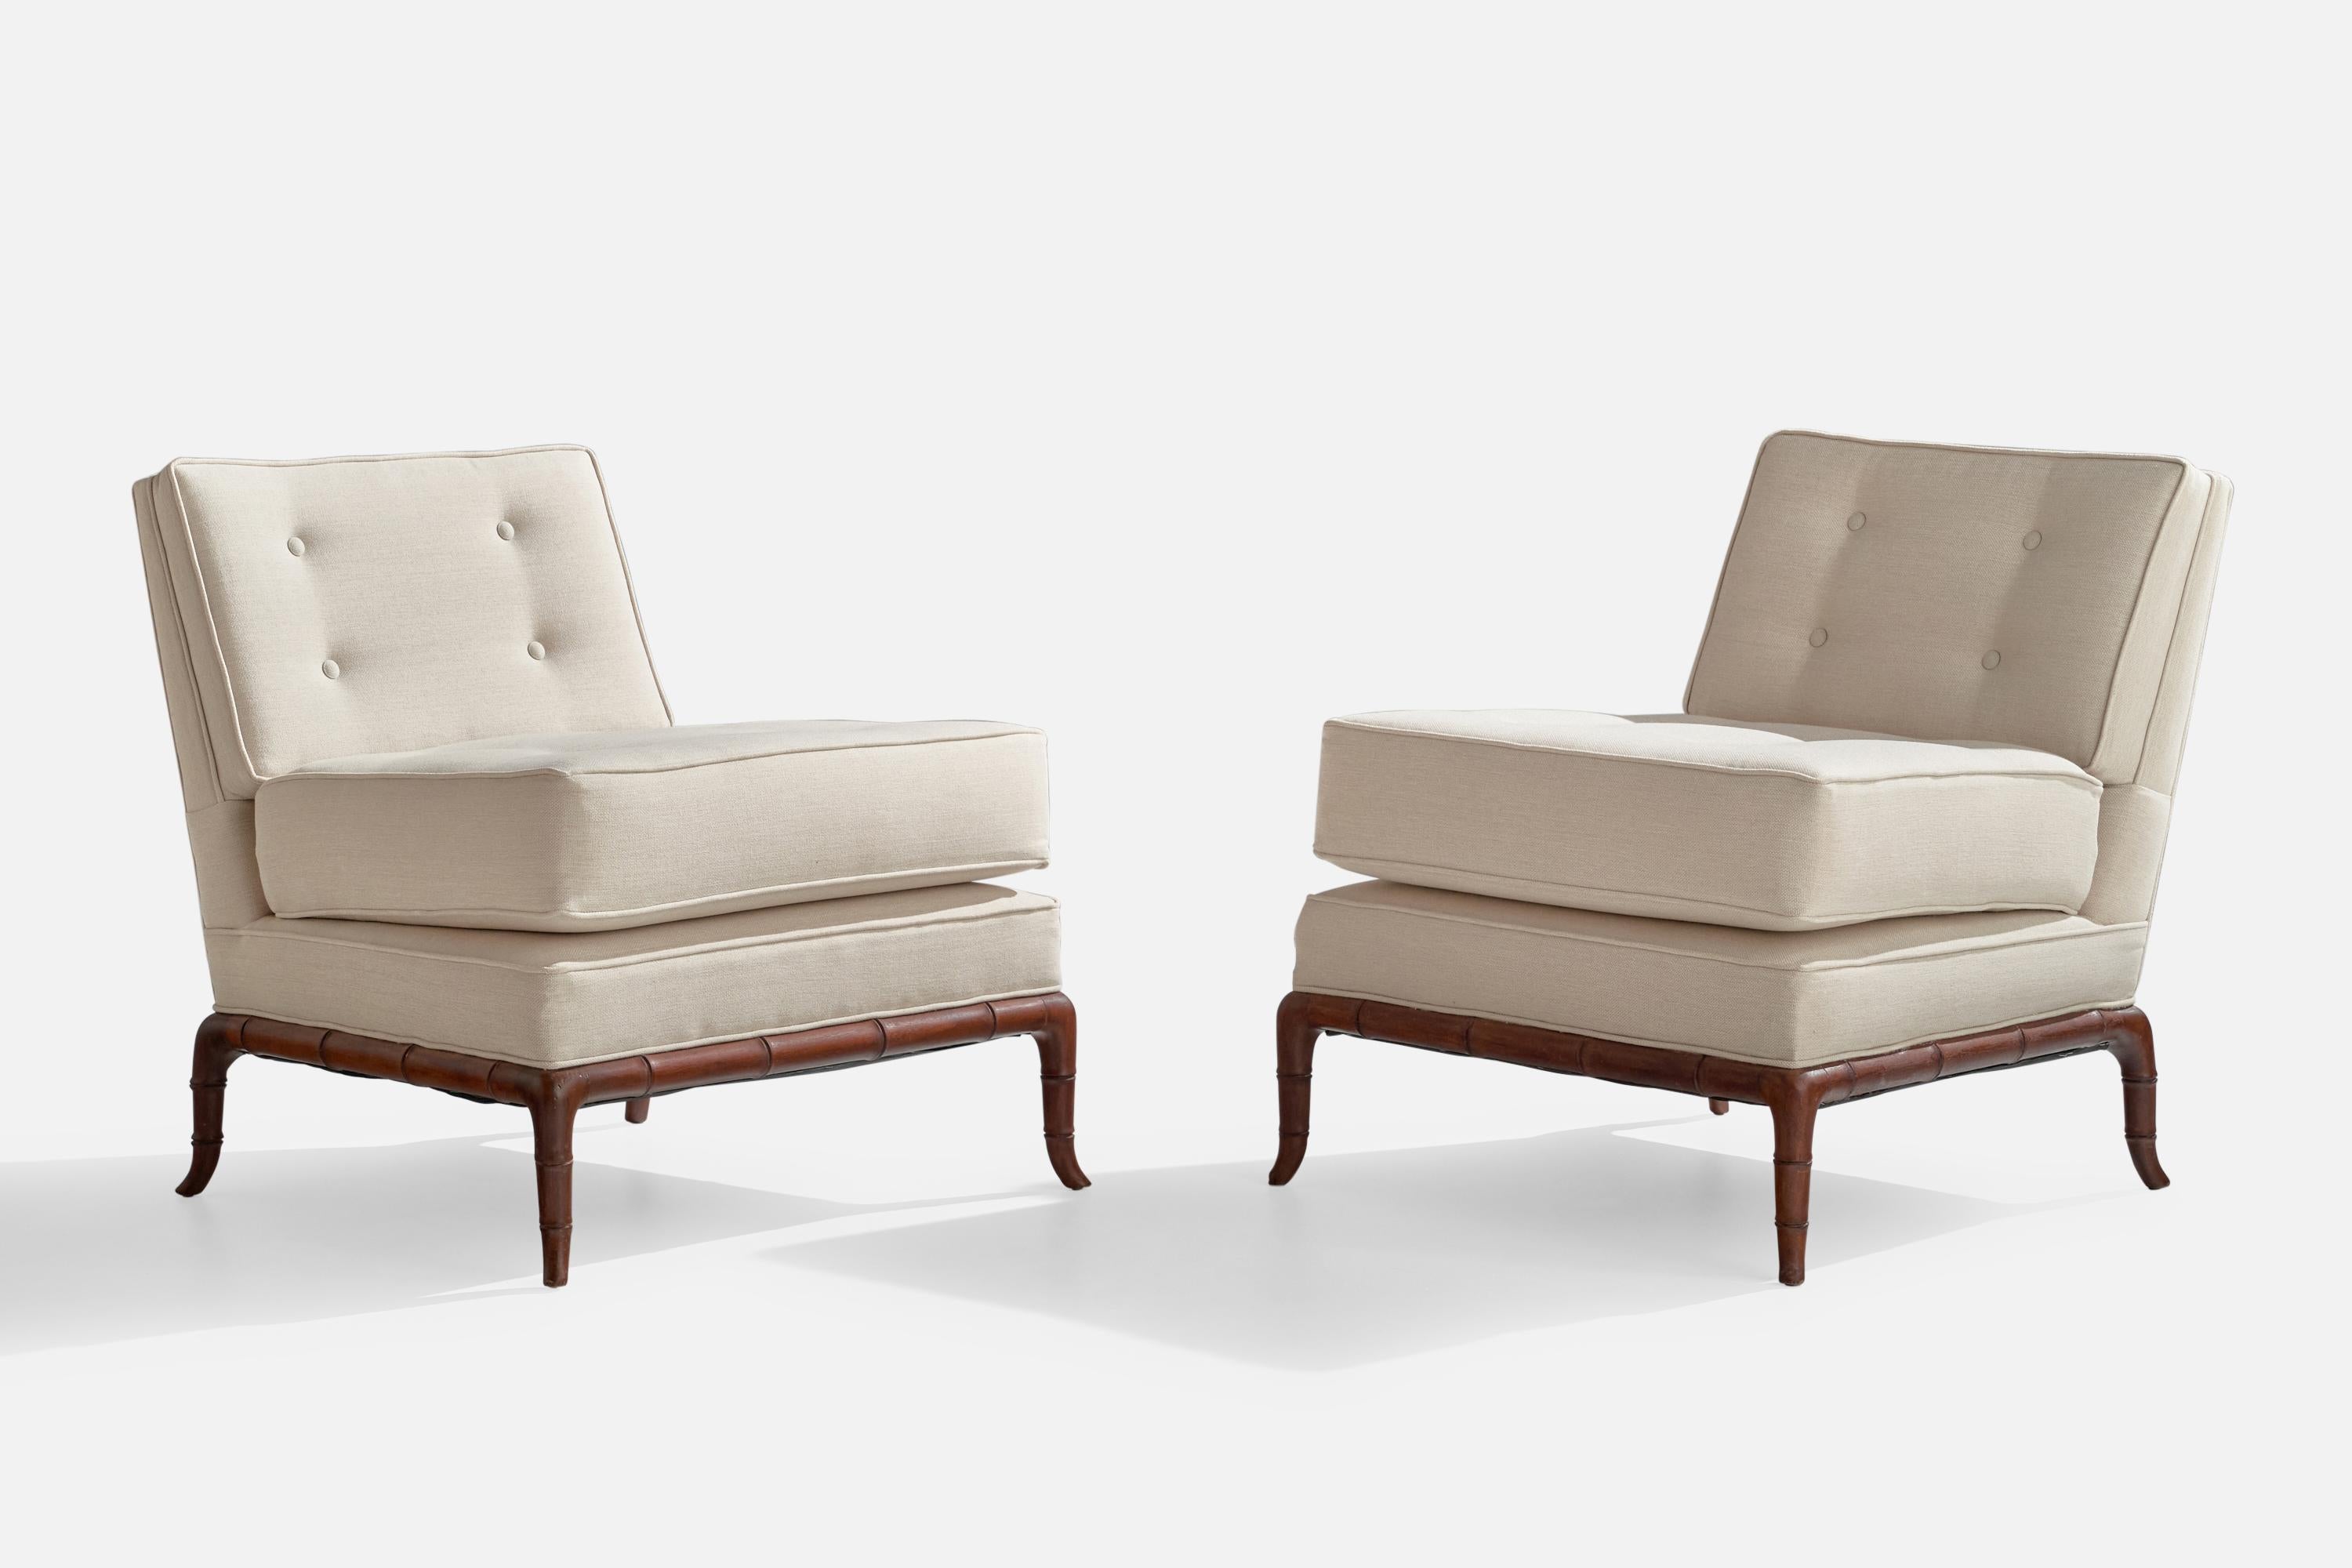 A pair of white fabric slipper chairs designed and produced in the US, c. 1940s.

Seat height: 19.4”
